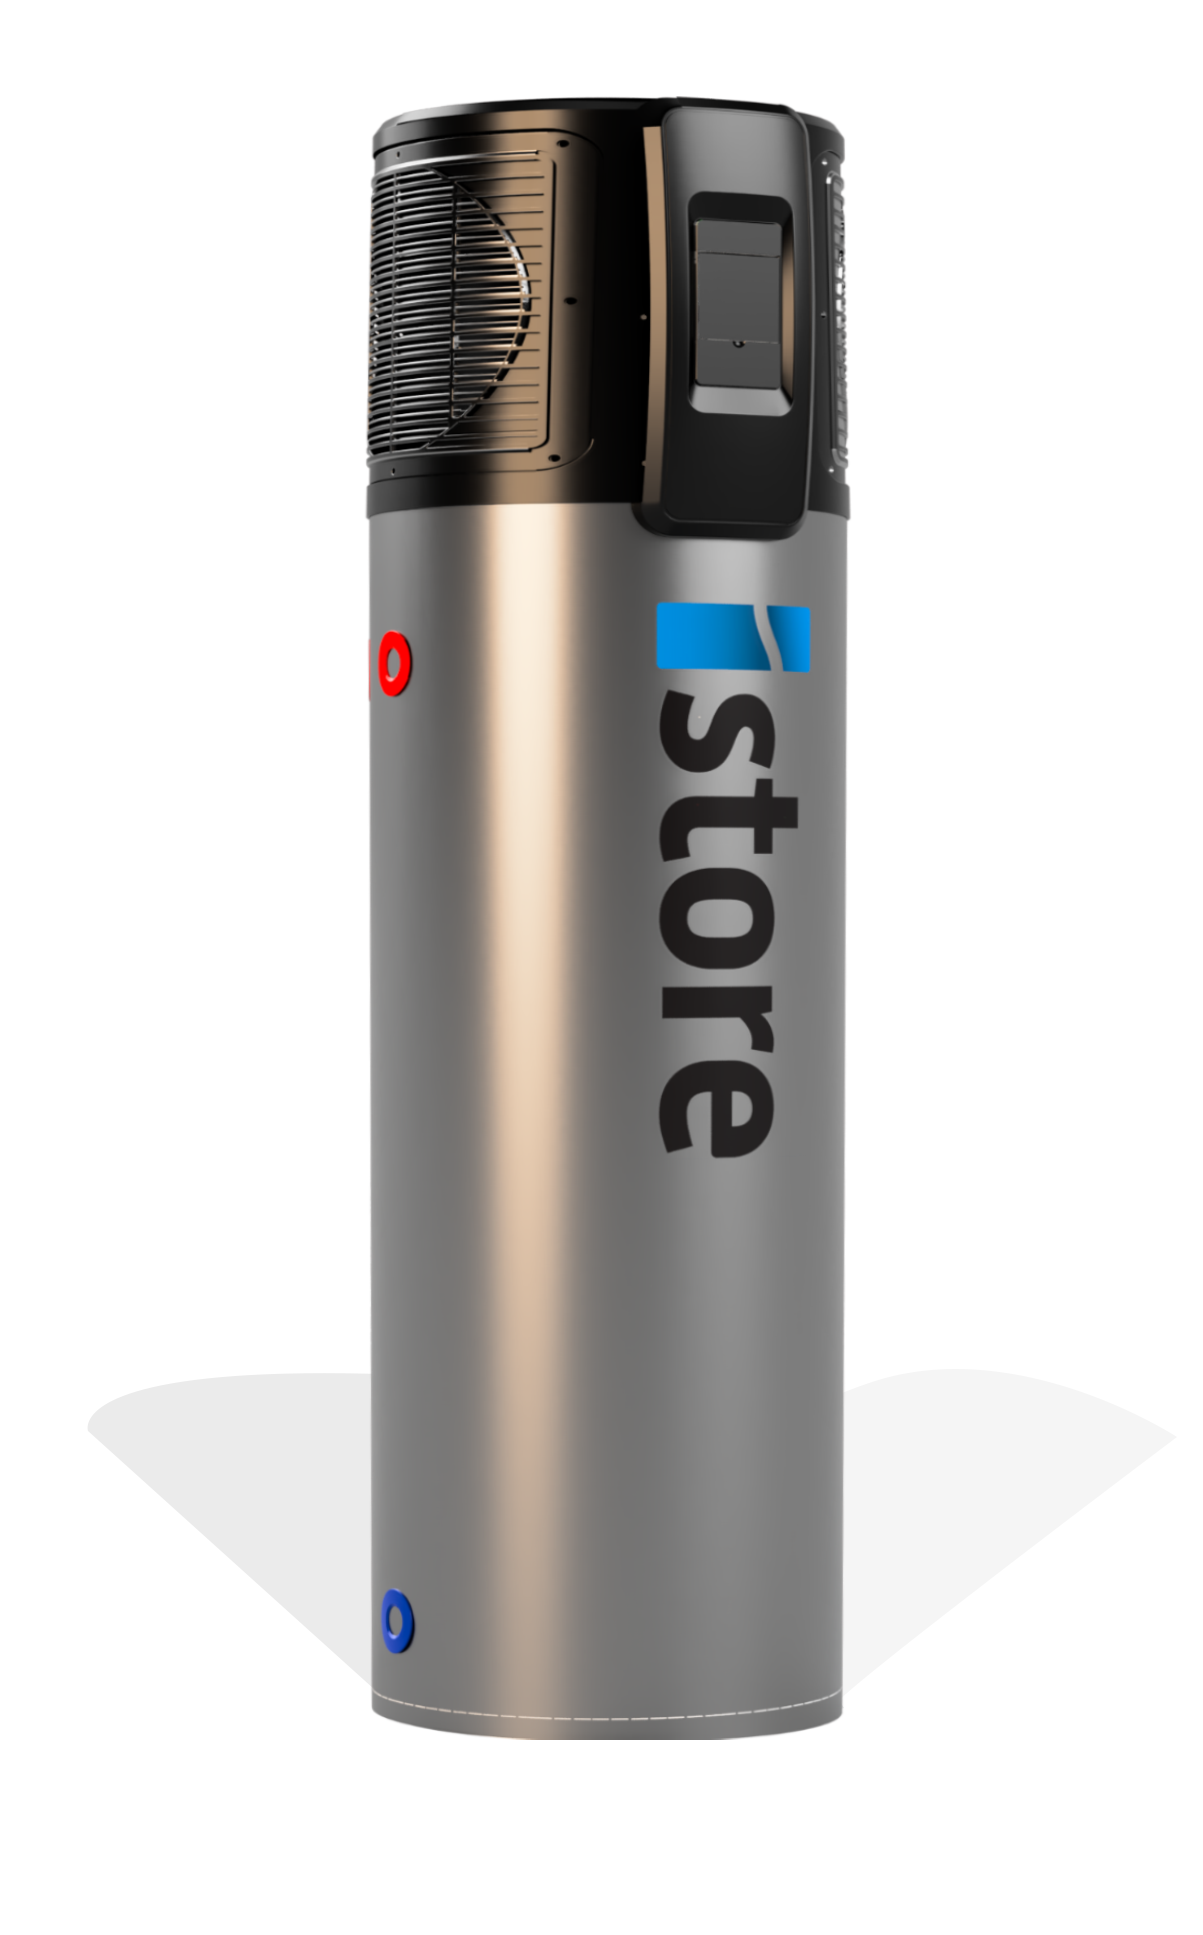 180l-istore-air-to-energy-hot-water-system